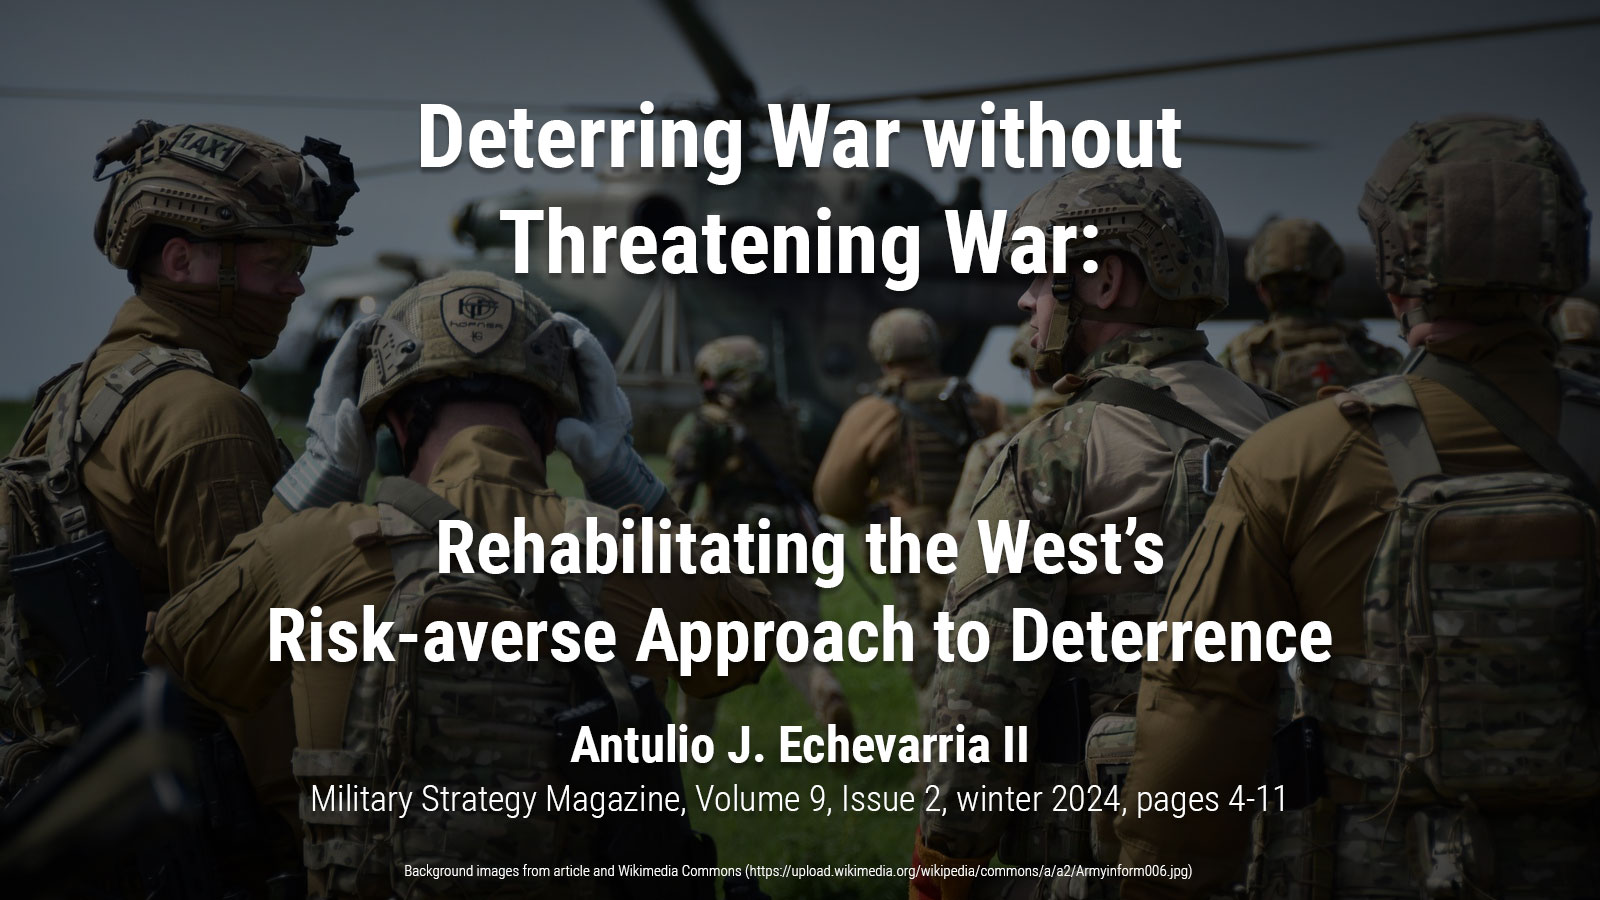 Deterring War without Threatening War: Rehabilitating the West’s Risk-averse Approach to Deterrence - Antulio J. Echevarria II